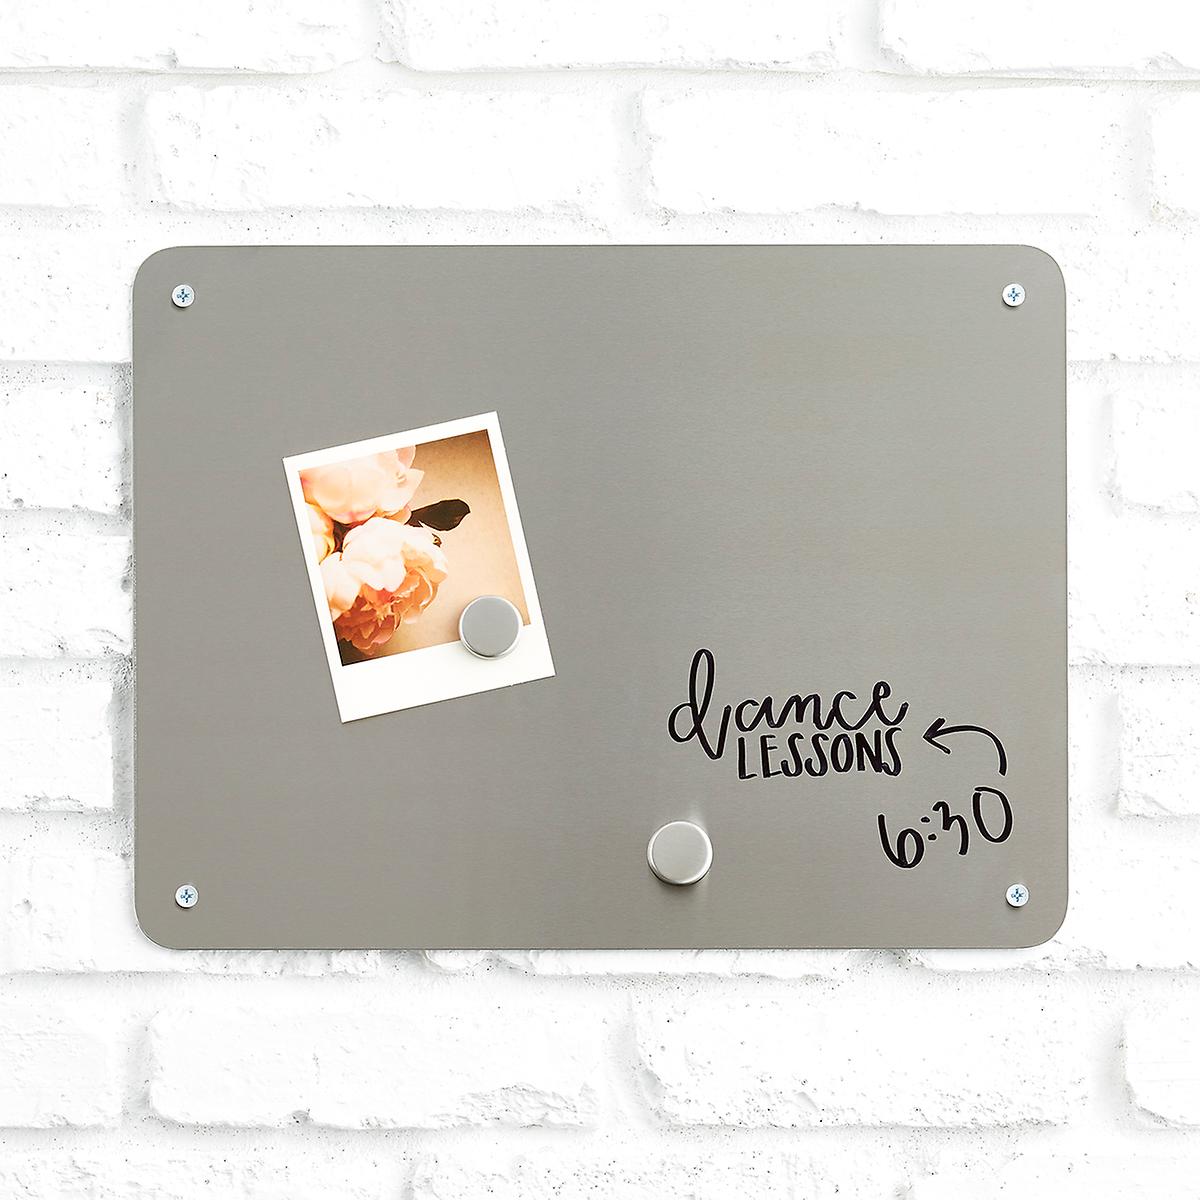 Three by Three Medium Stainless Steel Magnetic/Dry Erase Board | The Stainless Steel Magnetic Dry Erase Board